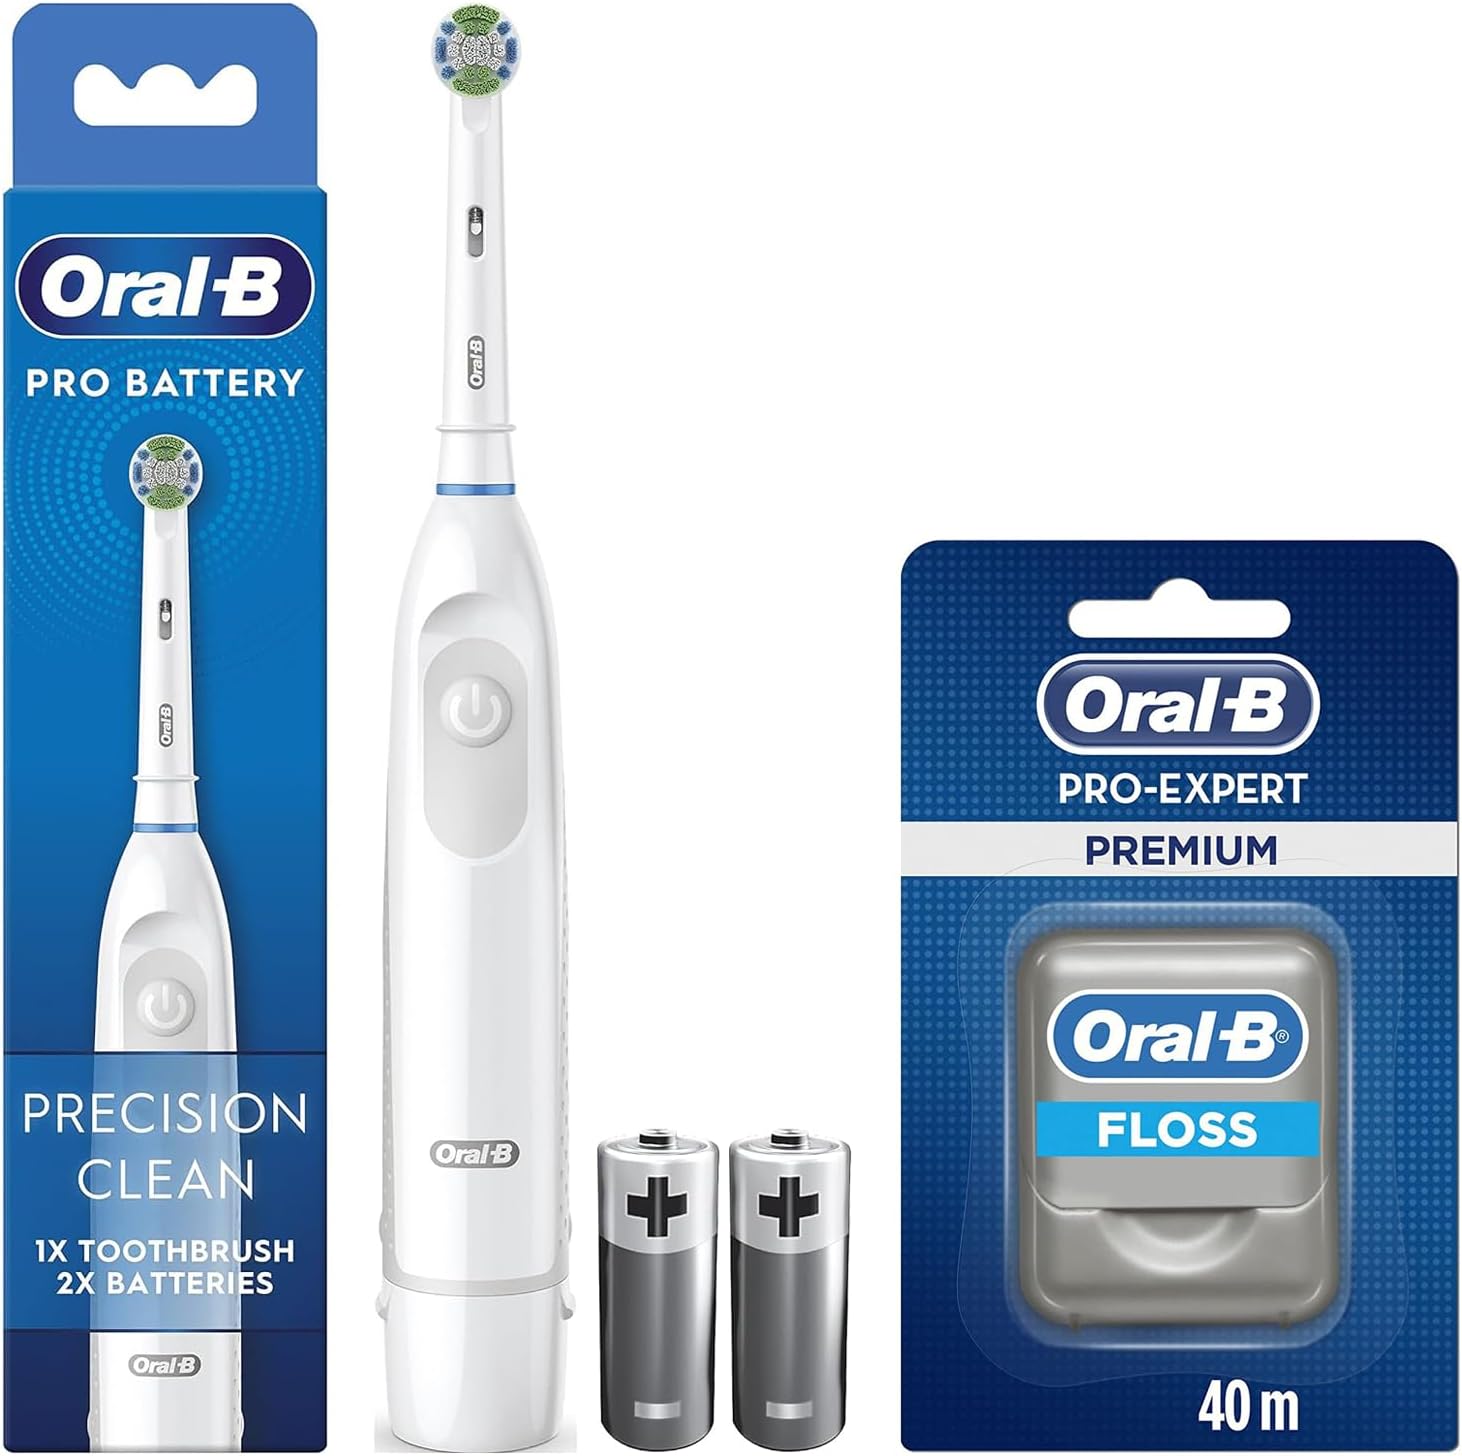 Dental Care Kit – Oral-B Pro Battery Precision Clean Electric Toothbrush Pack, Oral-B Pro-Expert Dental Floss Premium 40m Cool Mint, Value Pack